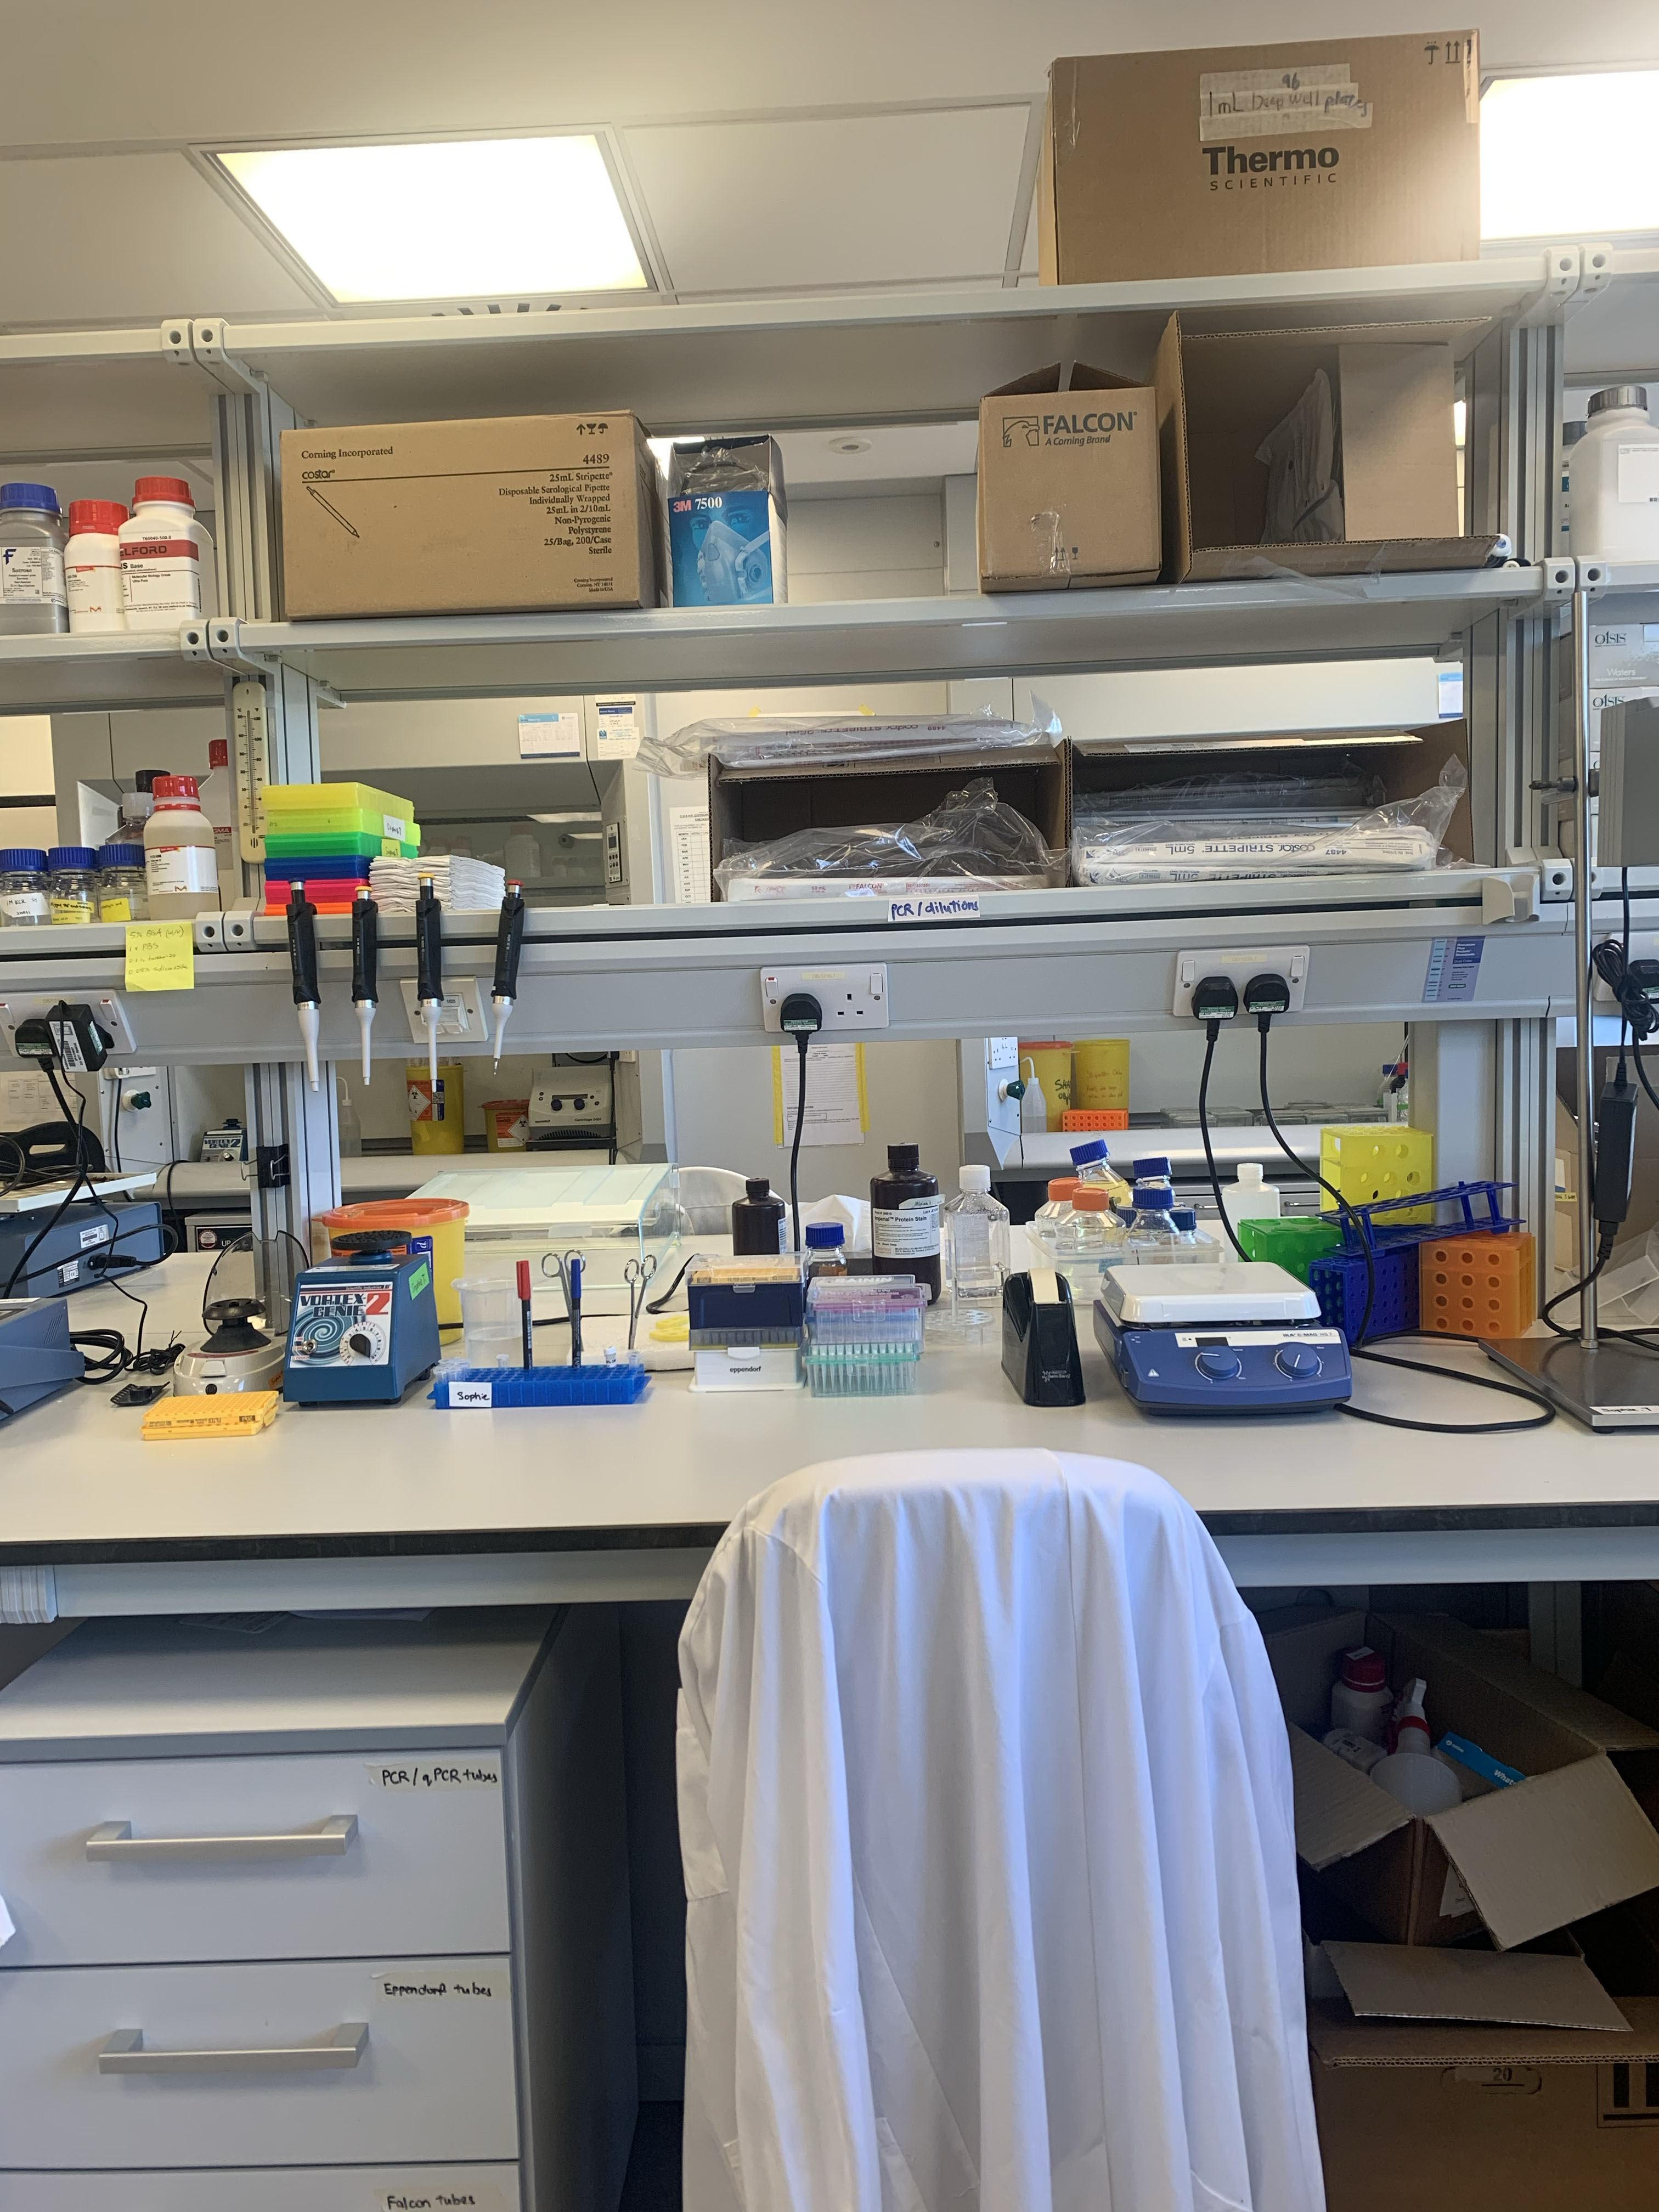 A neatly set up lab space with boxes, pipettes and a lab coat